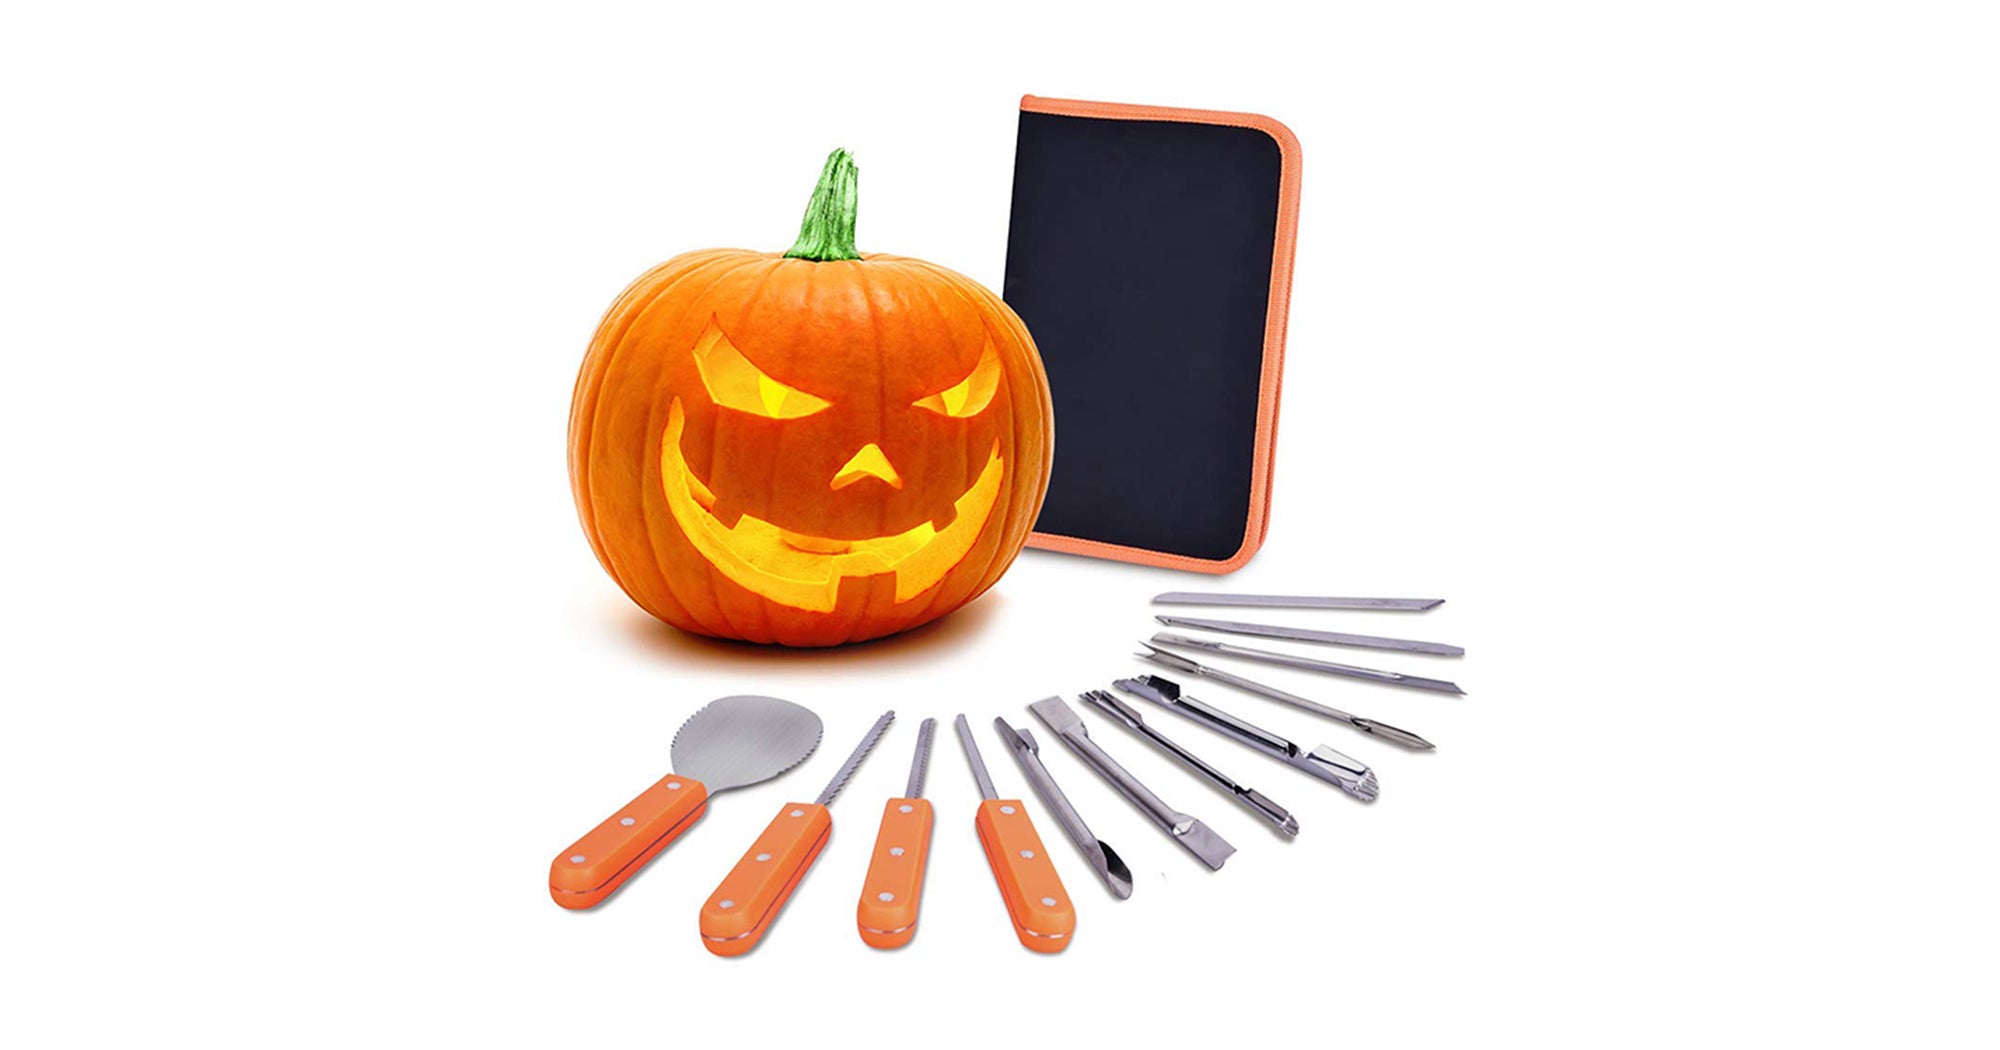 FEOAMO 11 Pieces Professional Heavy Duty Stainless Steel Jack O Lanterns Pumpkin Carving Tools Set for Halloween Kids Adults Party Decorations with Storage Carrying Bag Halloween Pumpkin Carving Kit